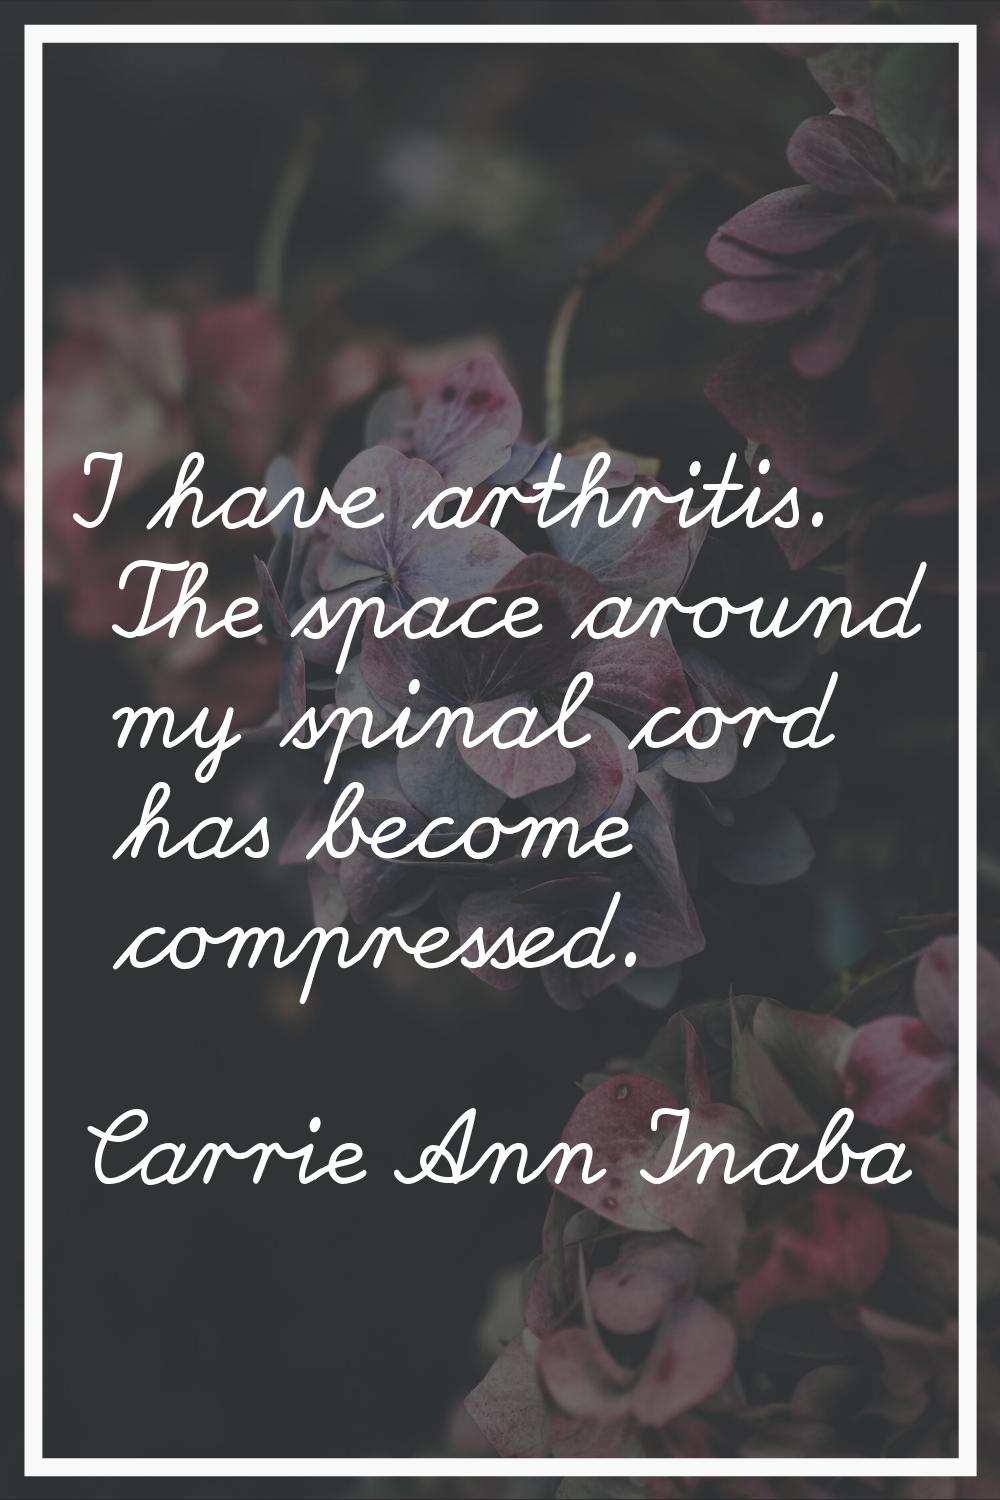 I have arthritis. The space around my spinal cord has become compressed.